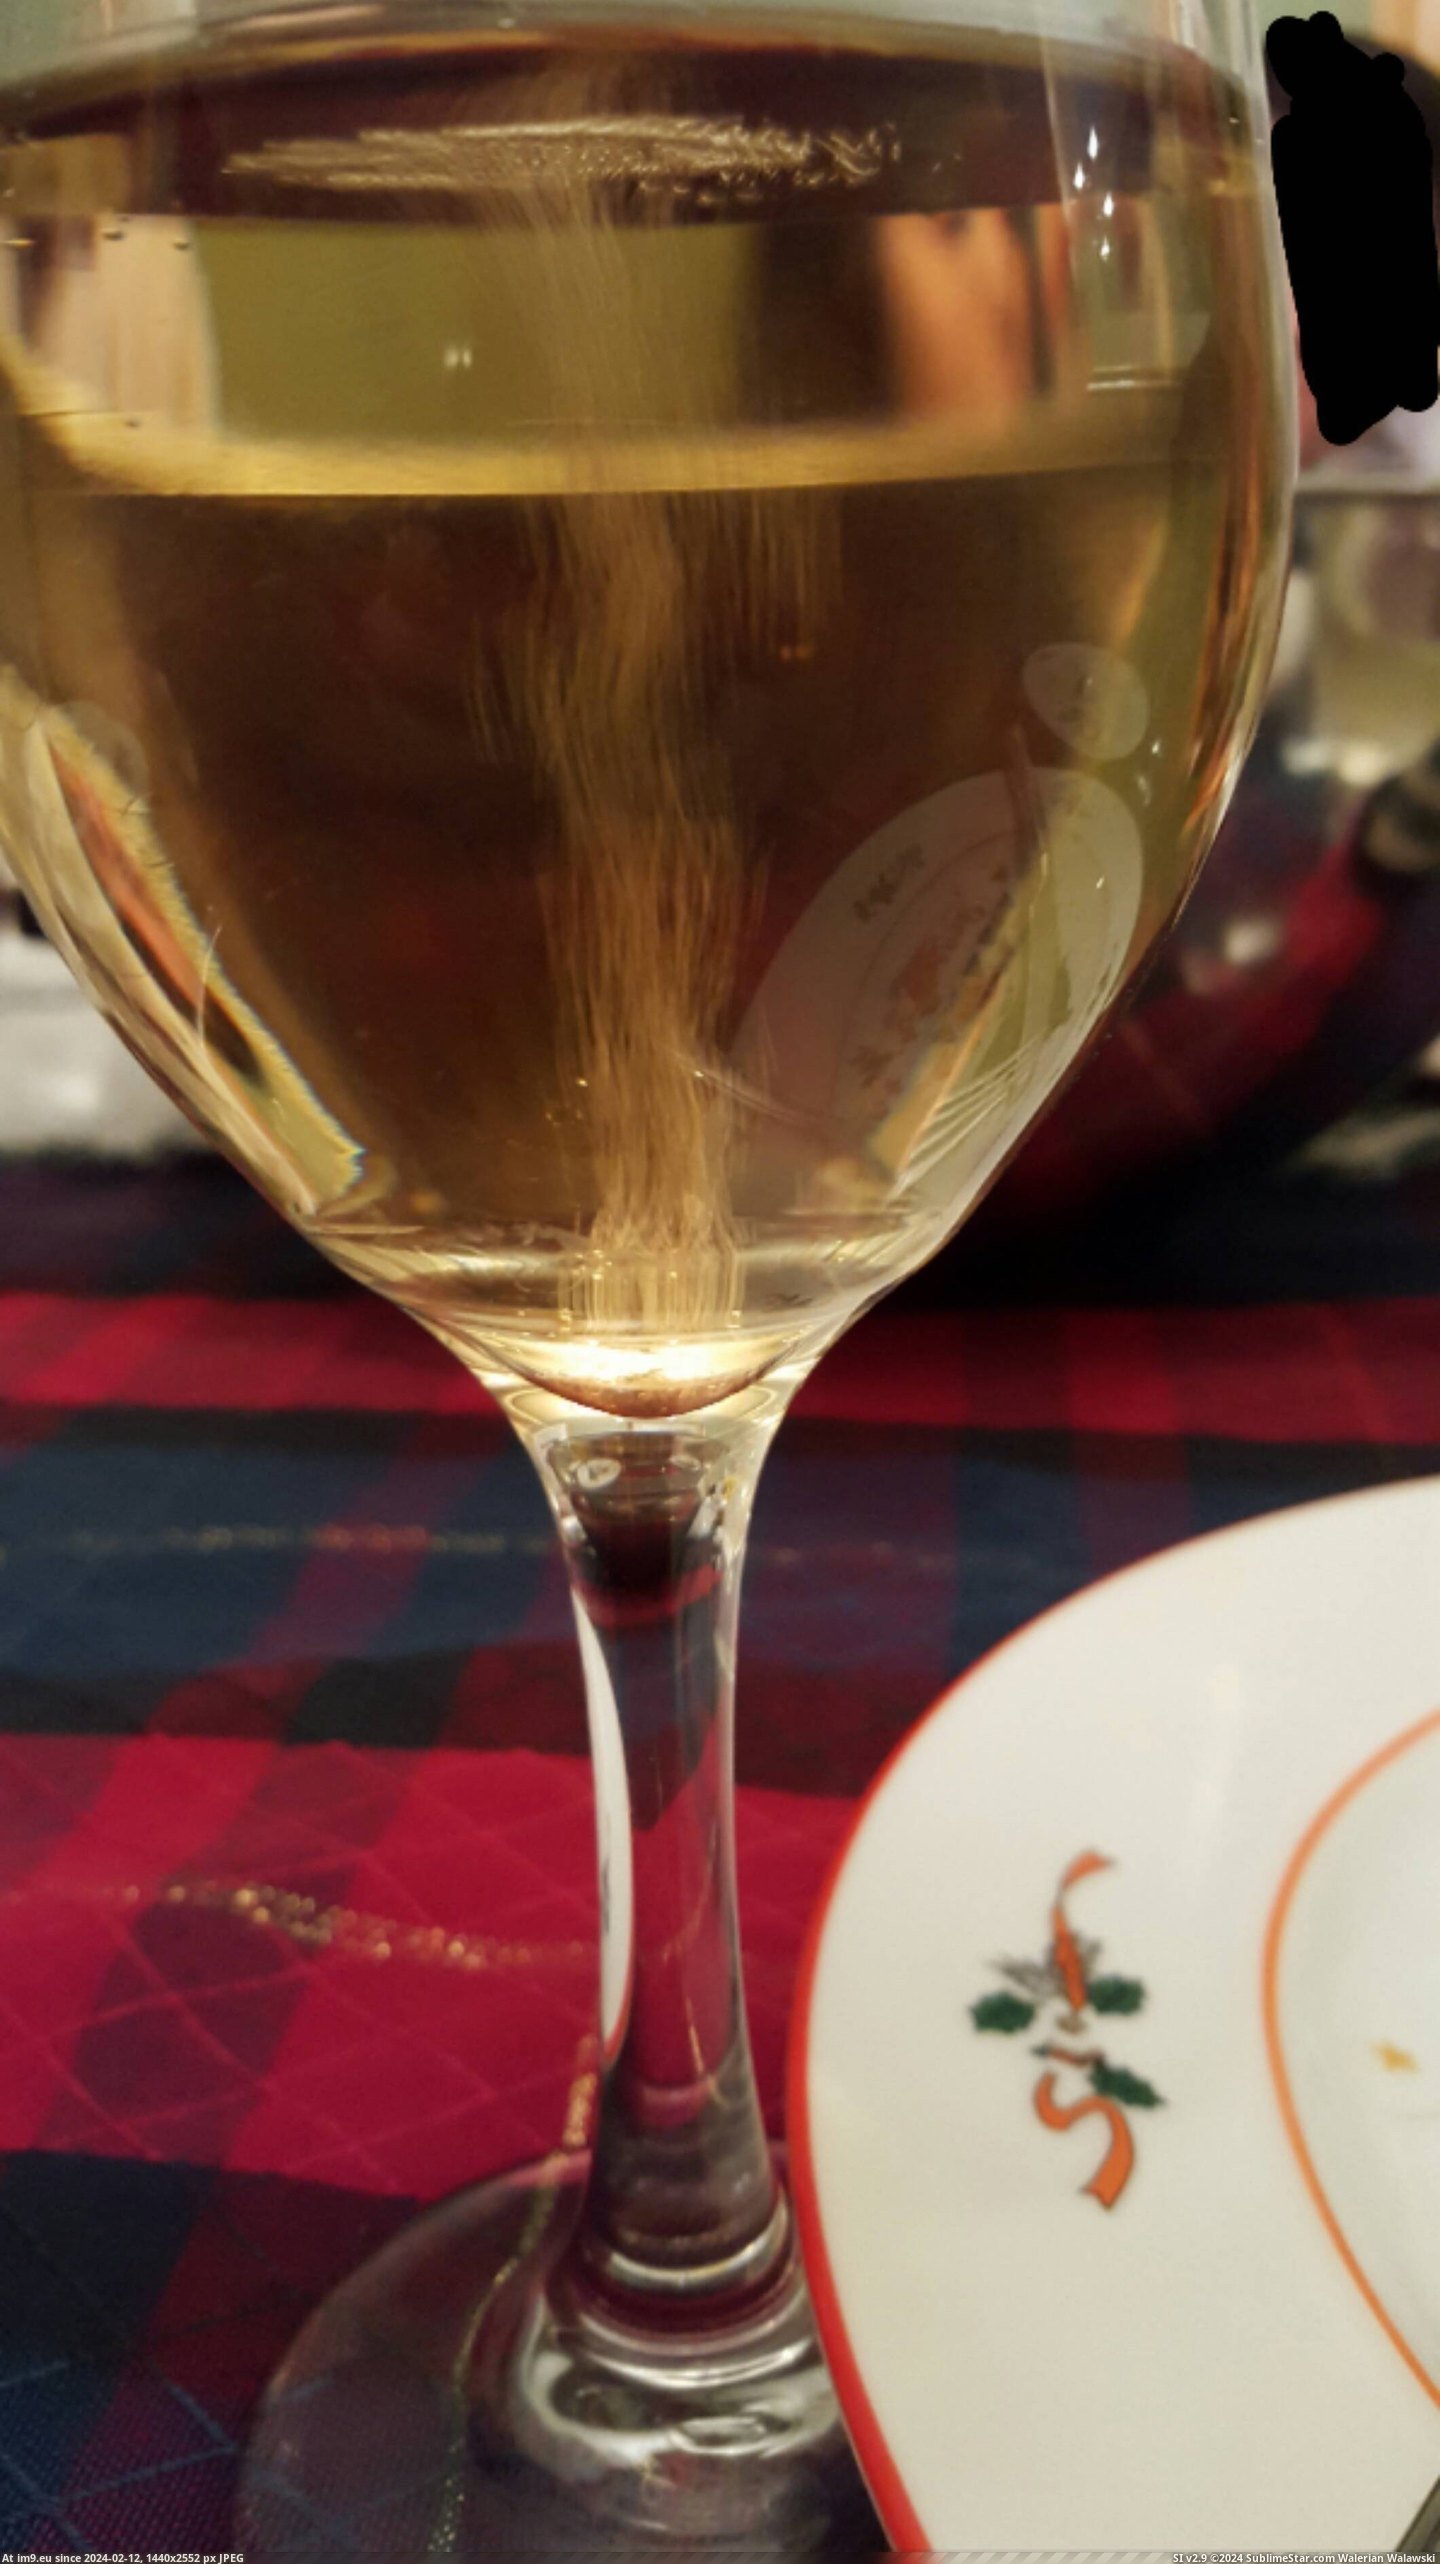 [Mildlyinteresting] My champagne is only bubbling in the middle (in My r/MILDLYINTERESTING favs)